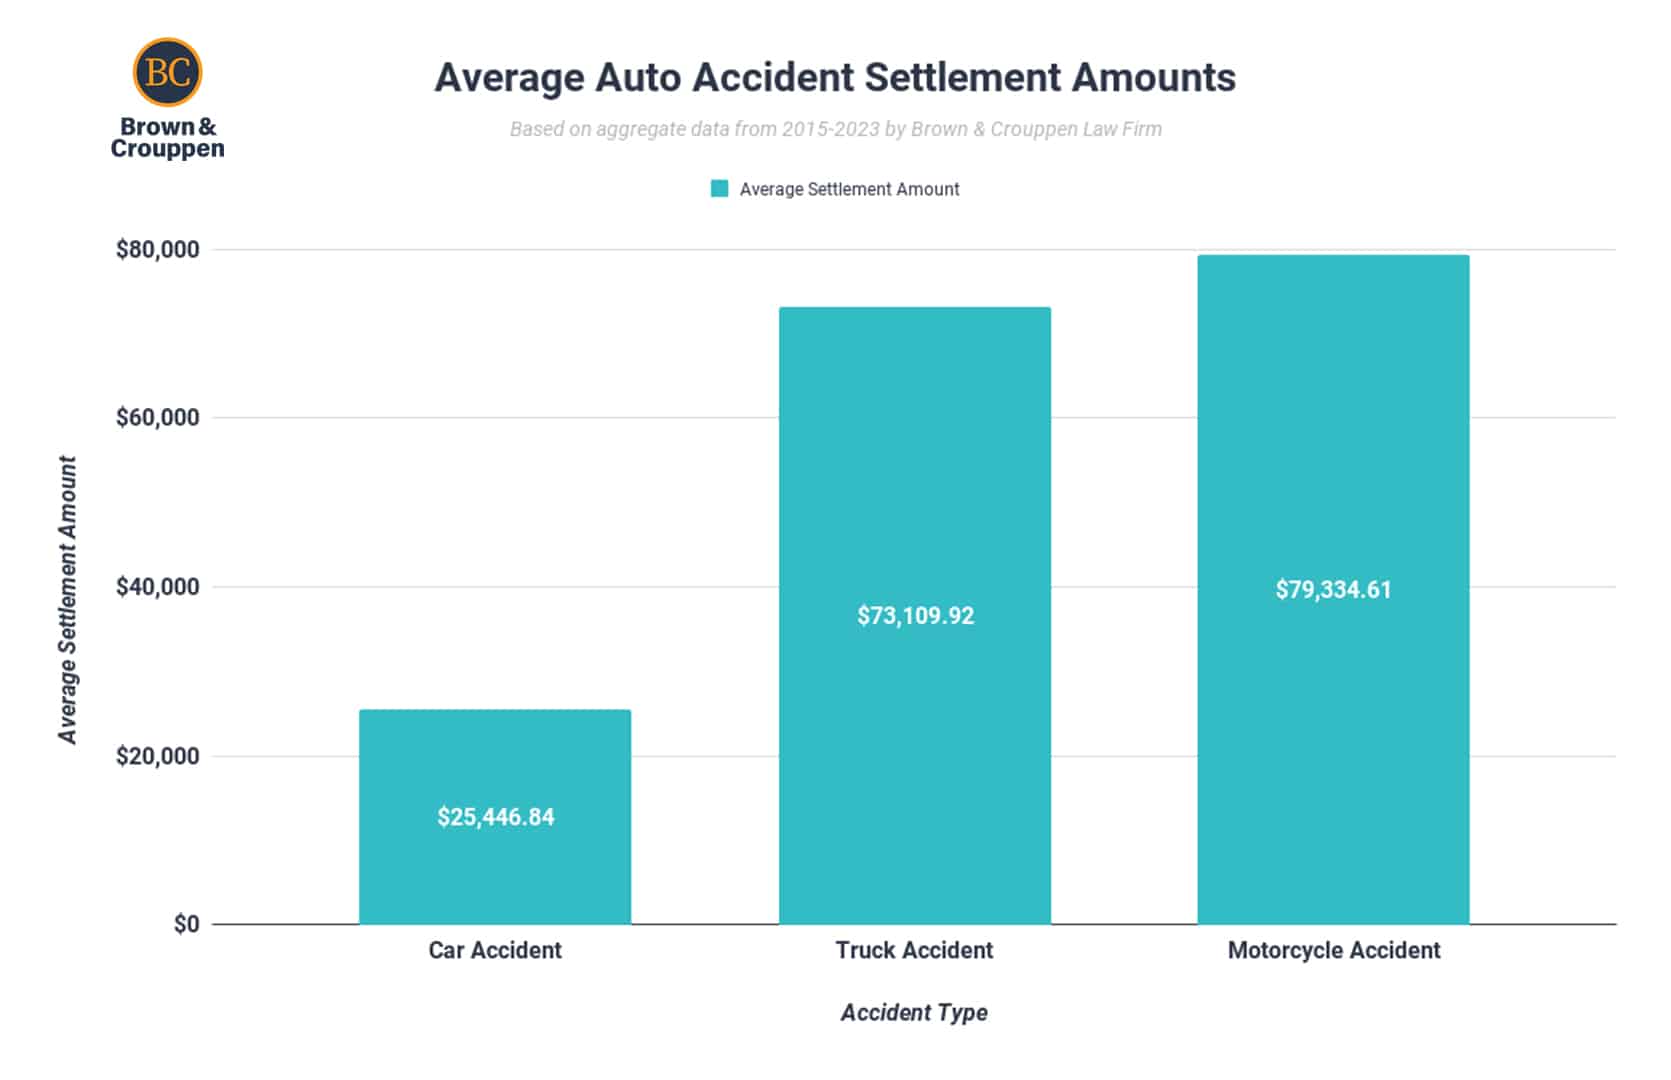 A chart showing the average car accident settlement amount compared to other auto accident settlements based on data from Brown & Crouppen Law Firm.